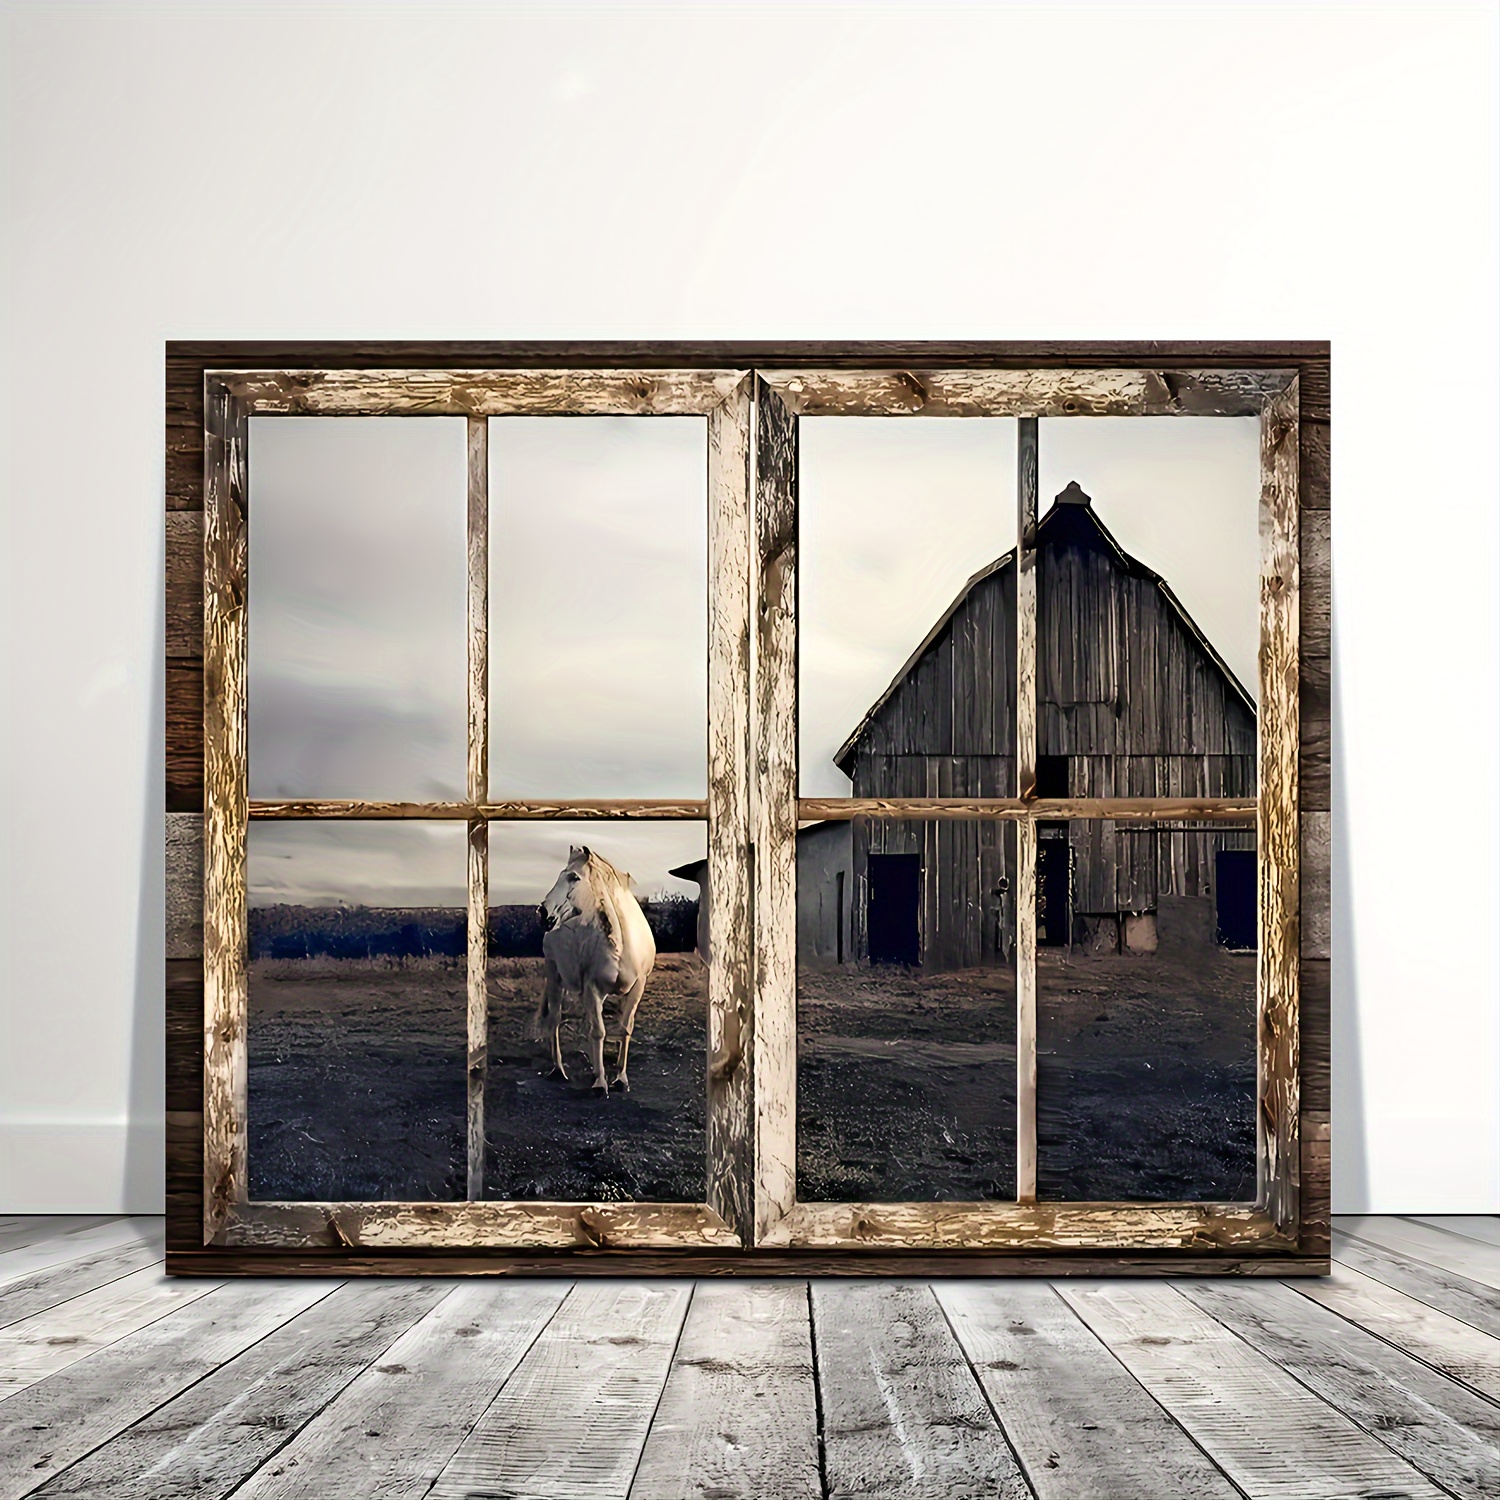 

1pc Wooden Framed, Old Barn Canvas Wall Art Rustic Wall Decor Fake Window Paintings Farmhouse Living Room Decor Barn Picture Modern Home Artwork Decor For Bedroom Kitchen,11.8inx15.7inch